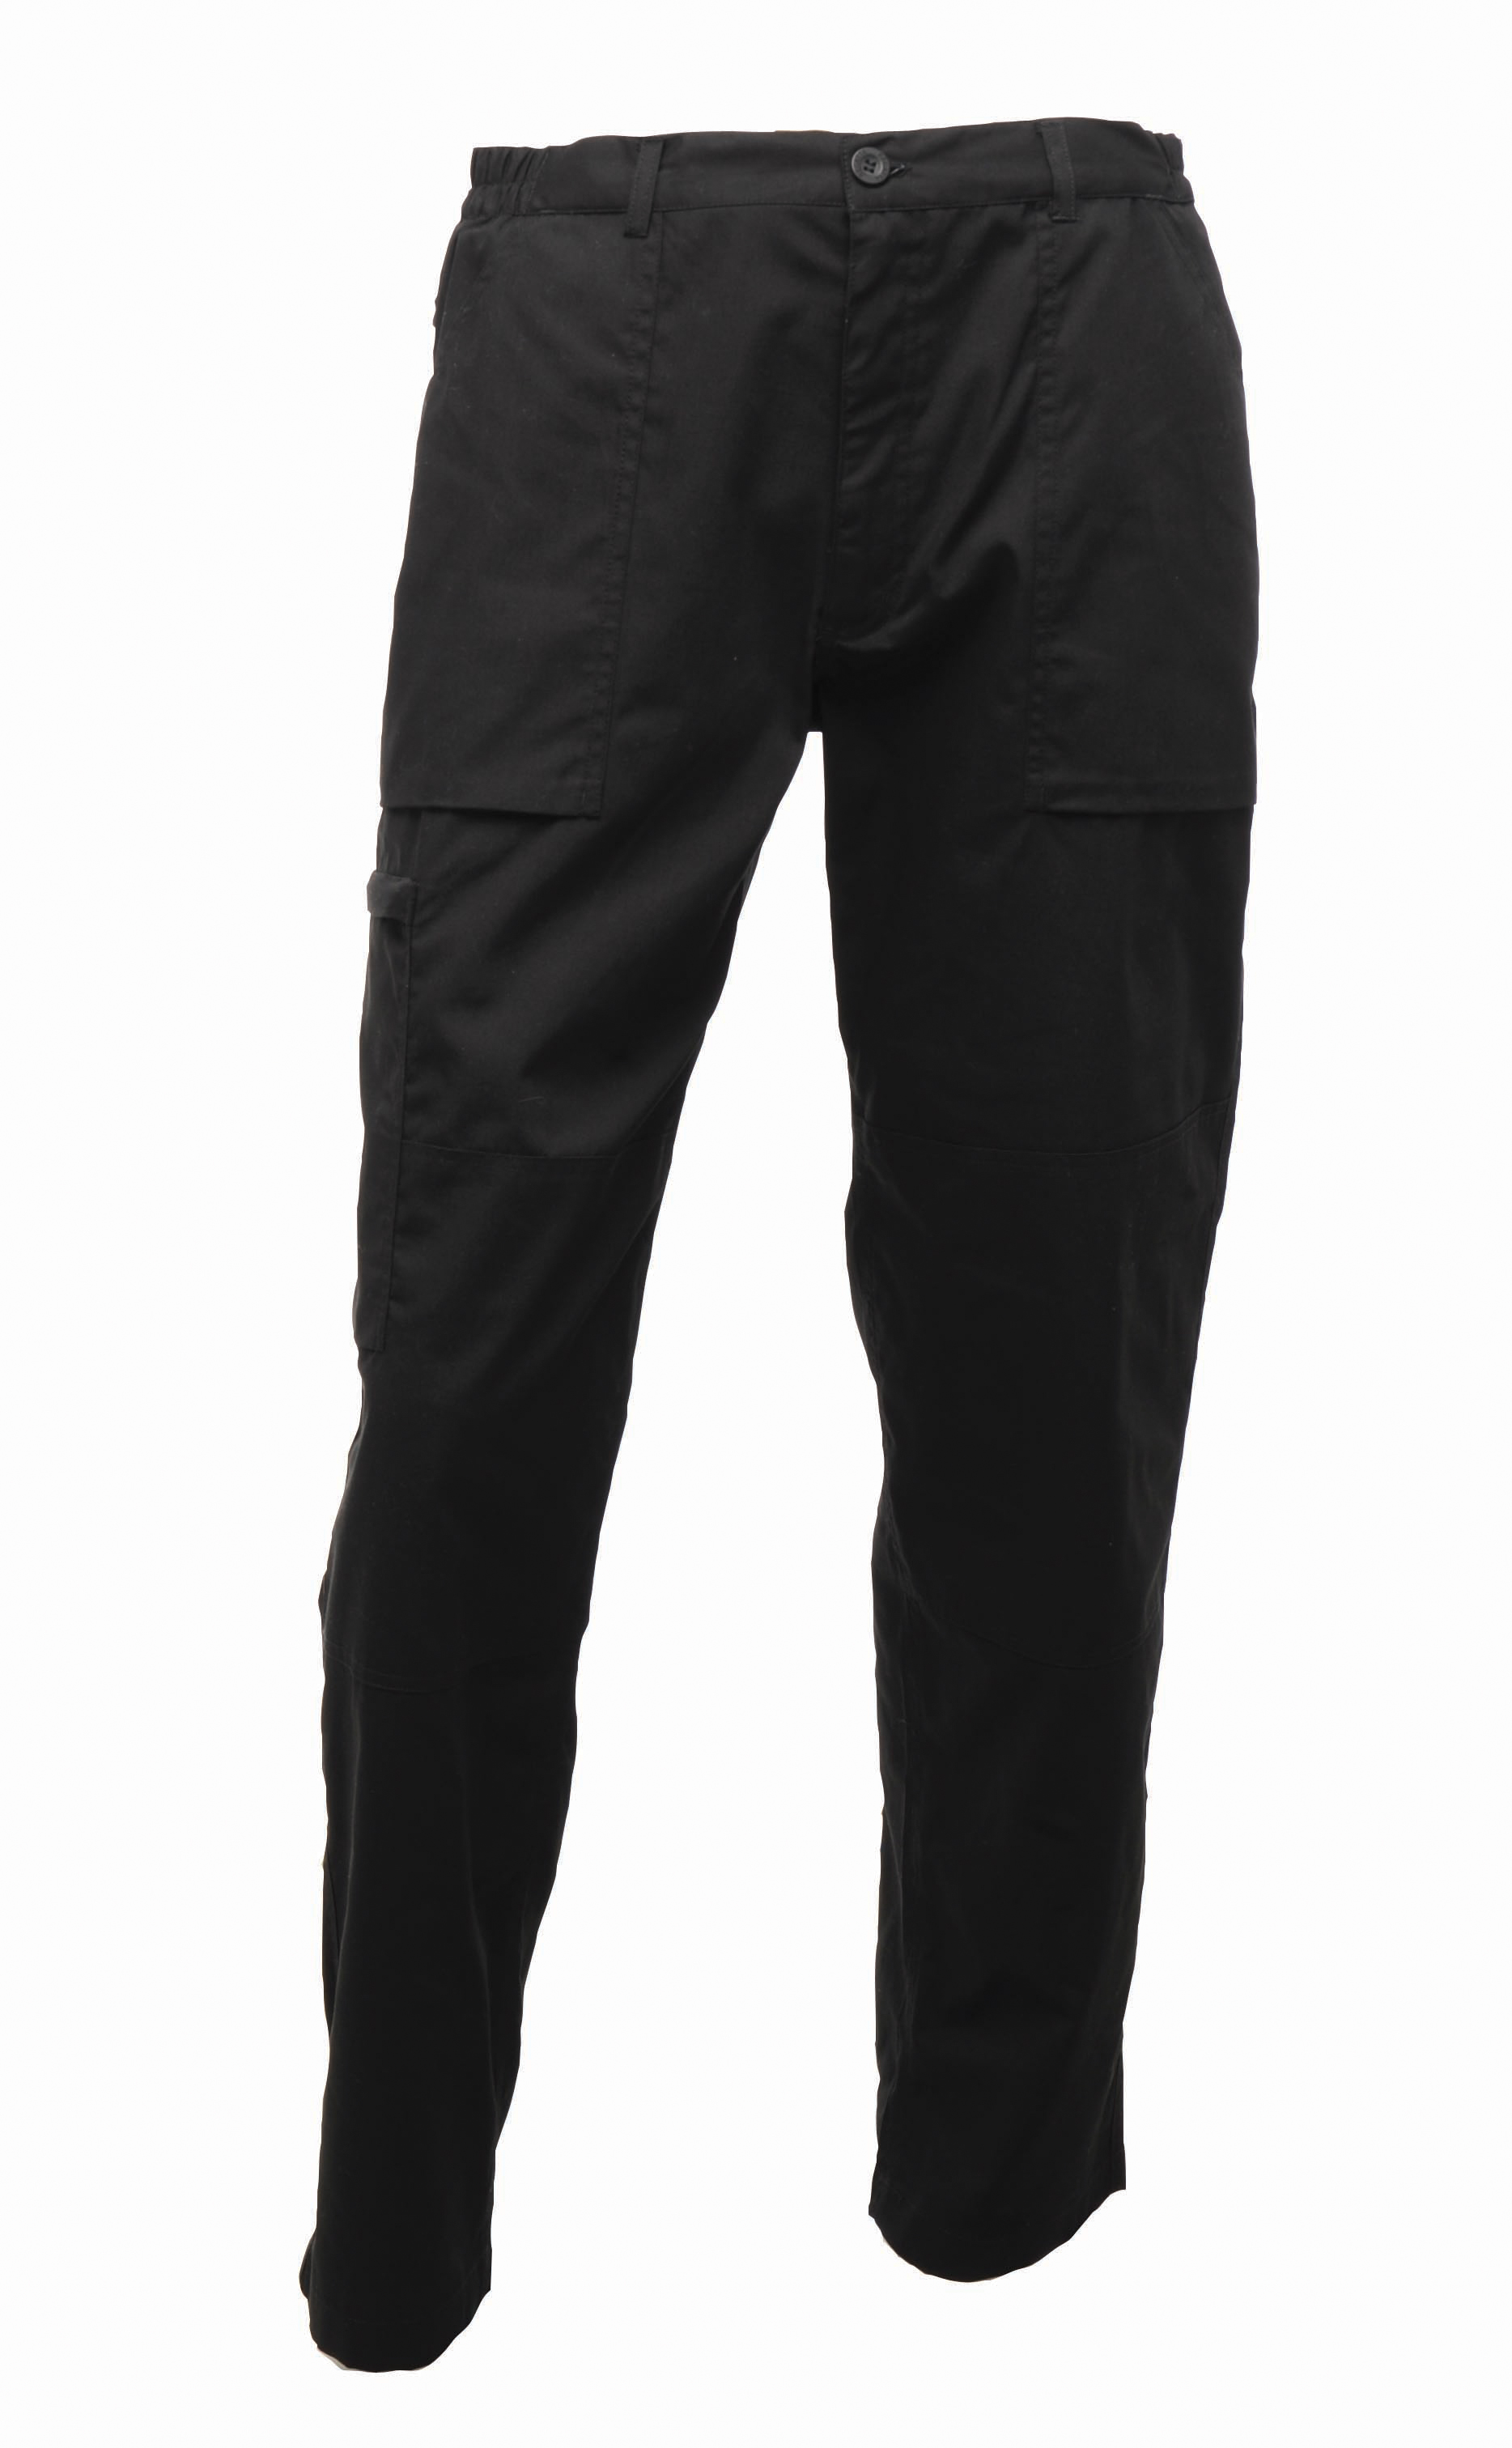 ax-httpswebsystems.s3.amazonaws.comtmp_for_downloadregatta-mens-new-action-trousers-black.jpeg.jpg